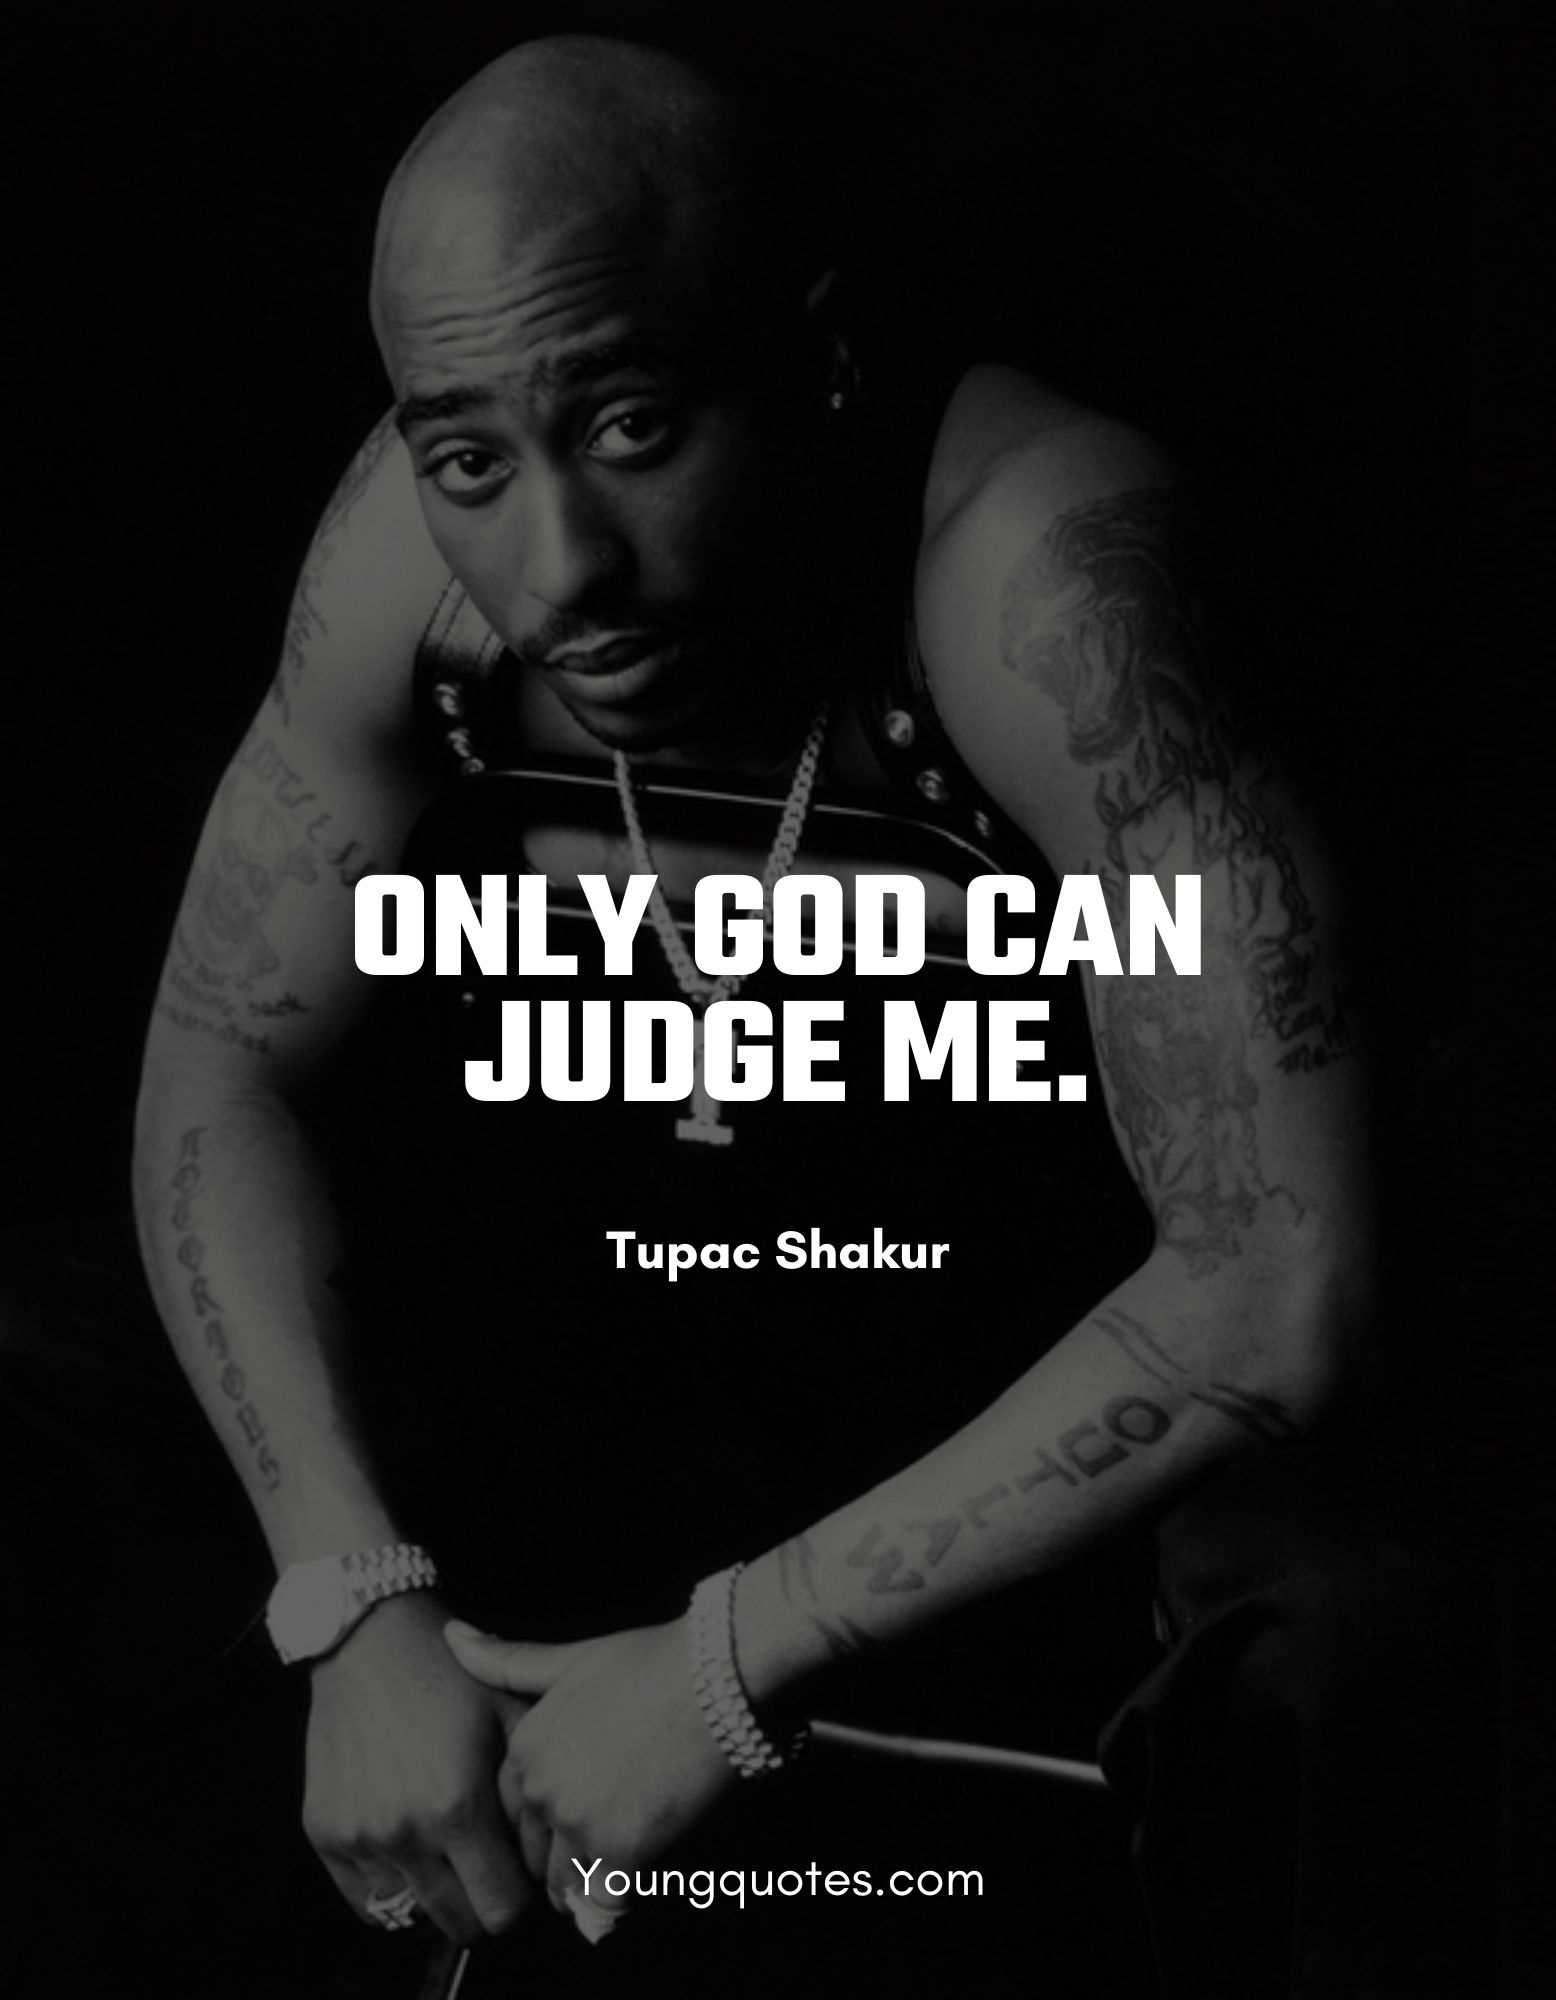 tupak shakur quotes on god - Only God can judge me.